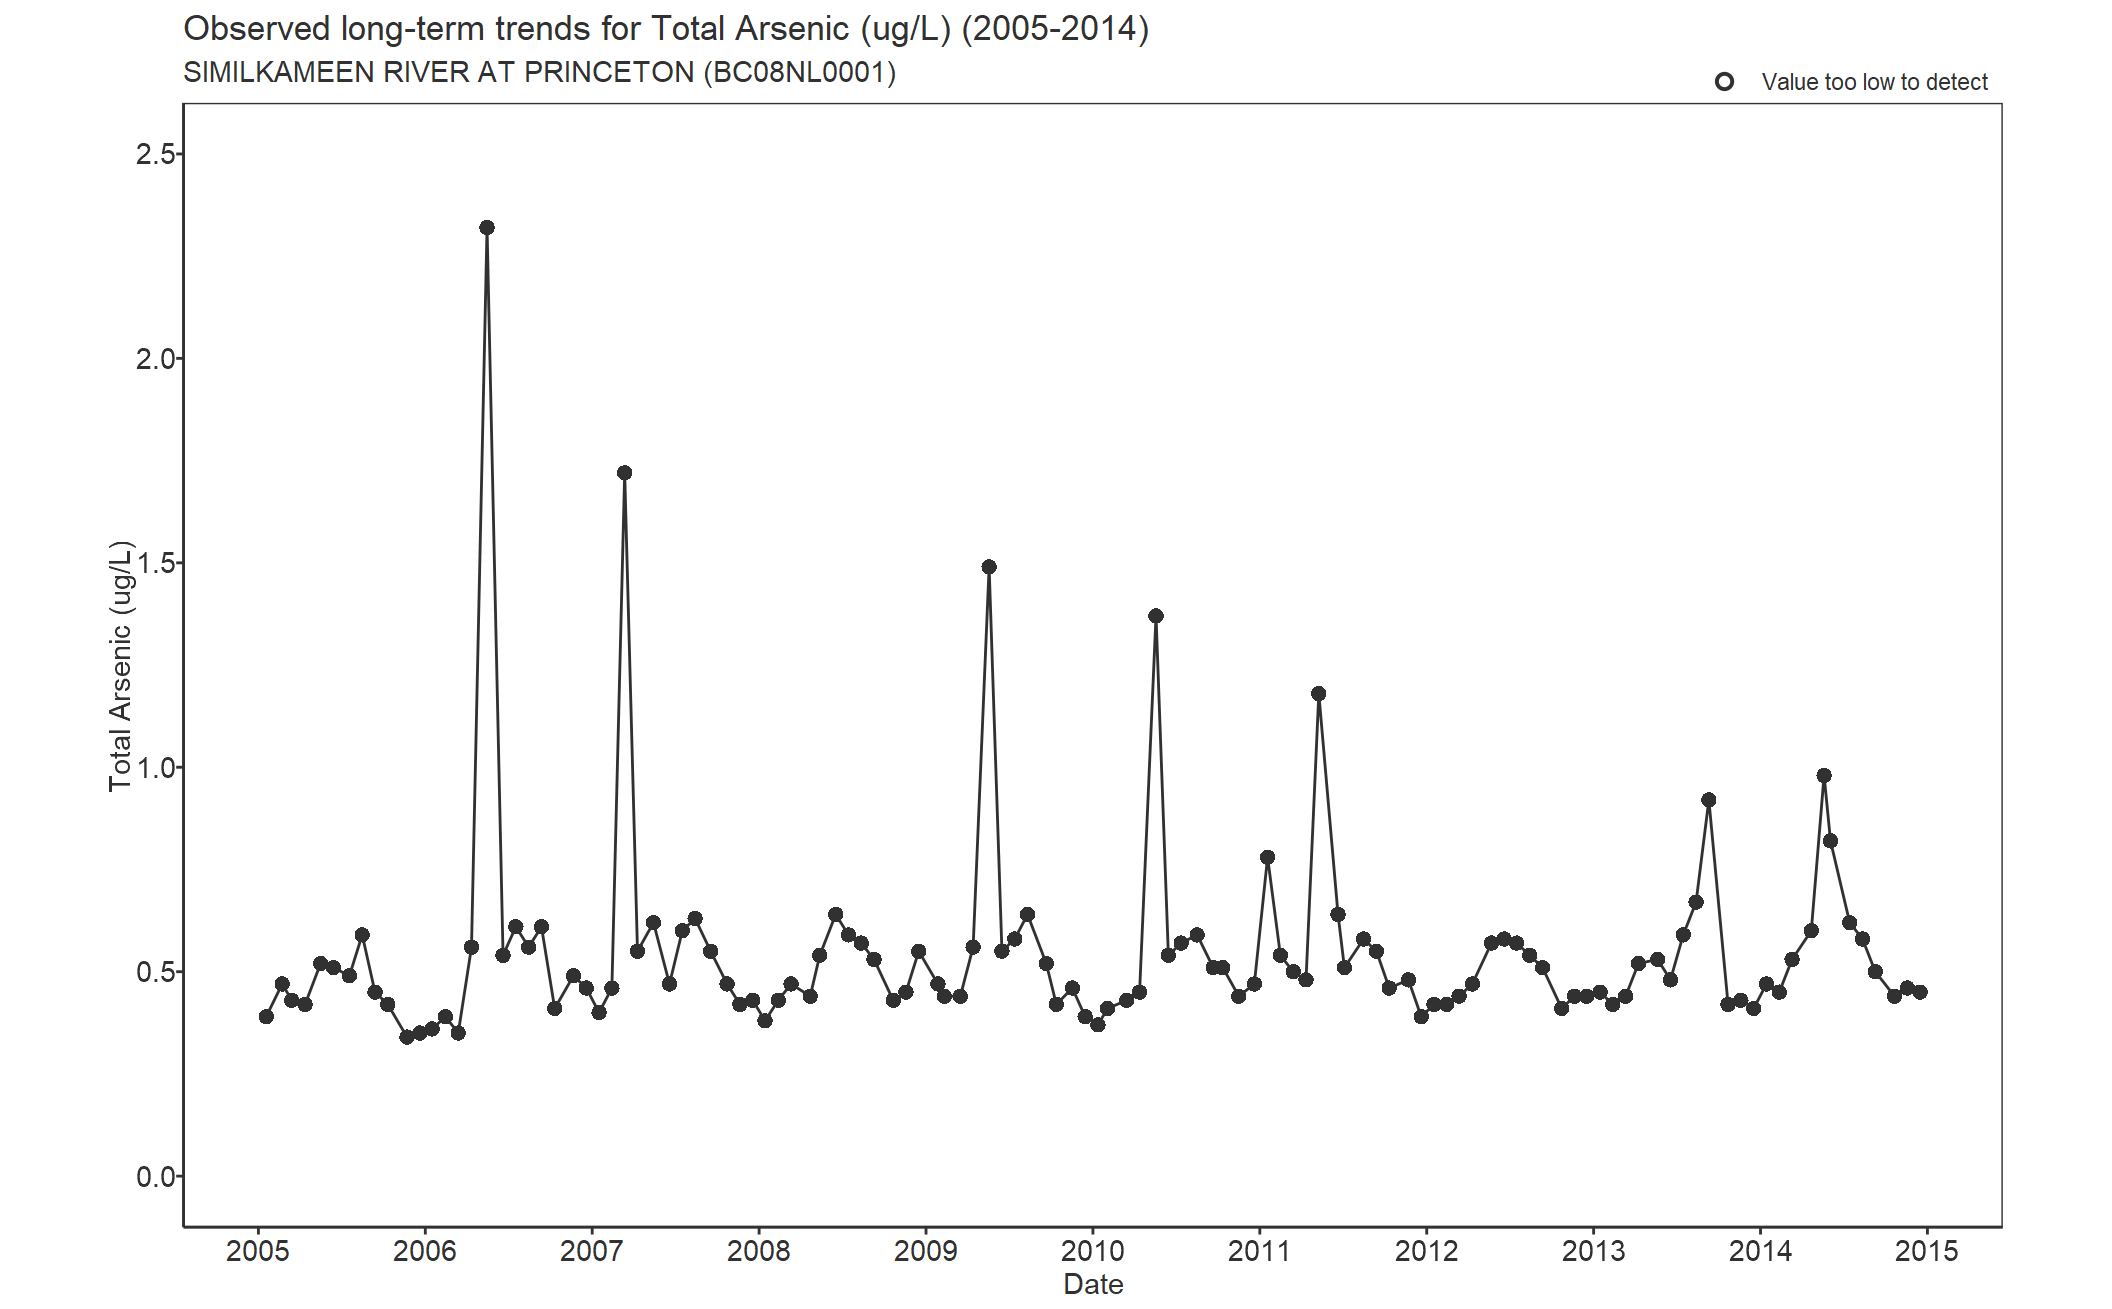 Observed long-term trends for Total Arsenic (2005-2014)